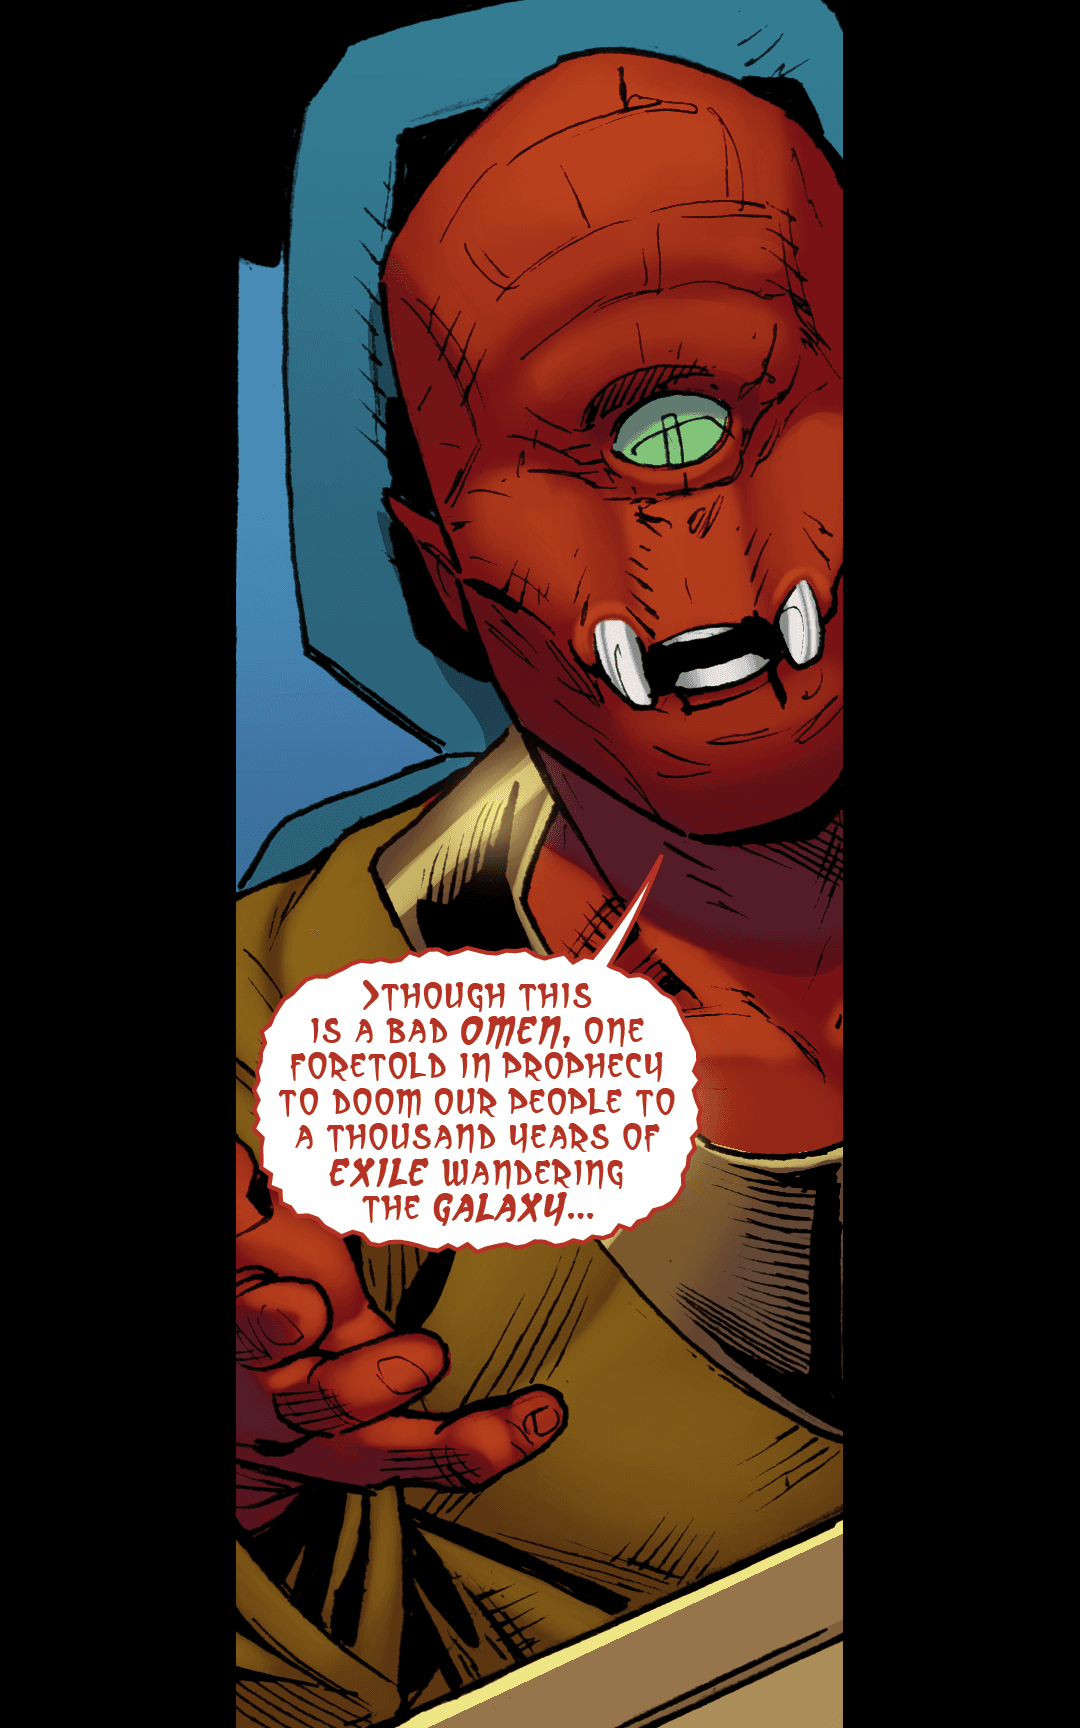 There Is Hope panel 22